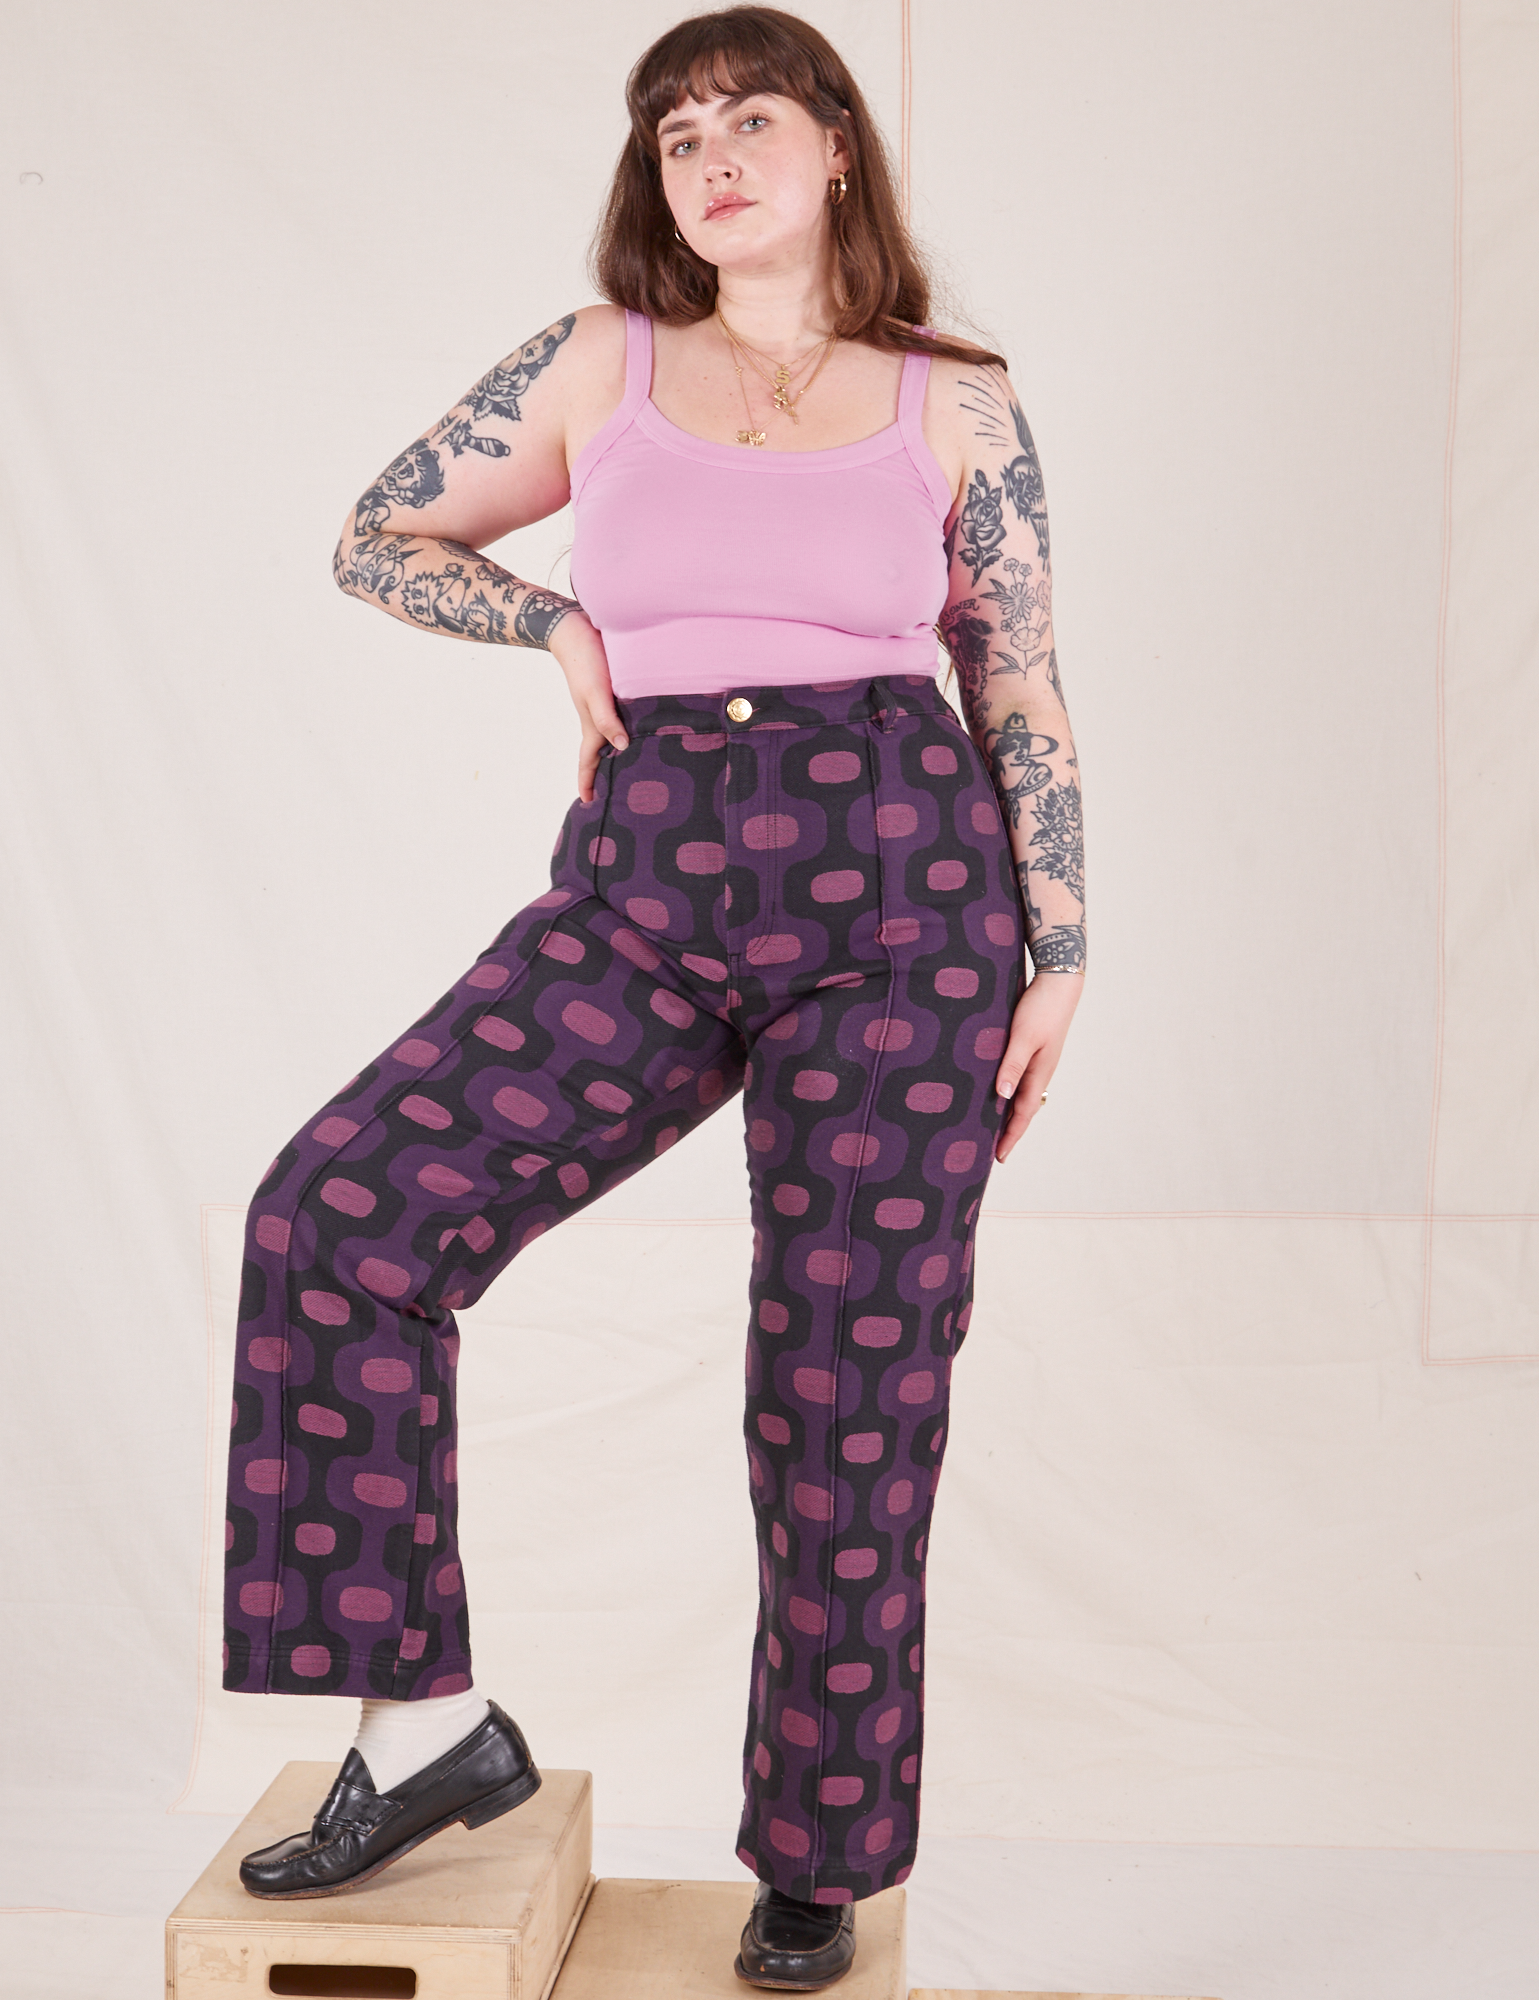 Sydney is wearing Western Pants in Purple Tile Jacquard and bubblegum pink Cami